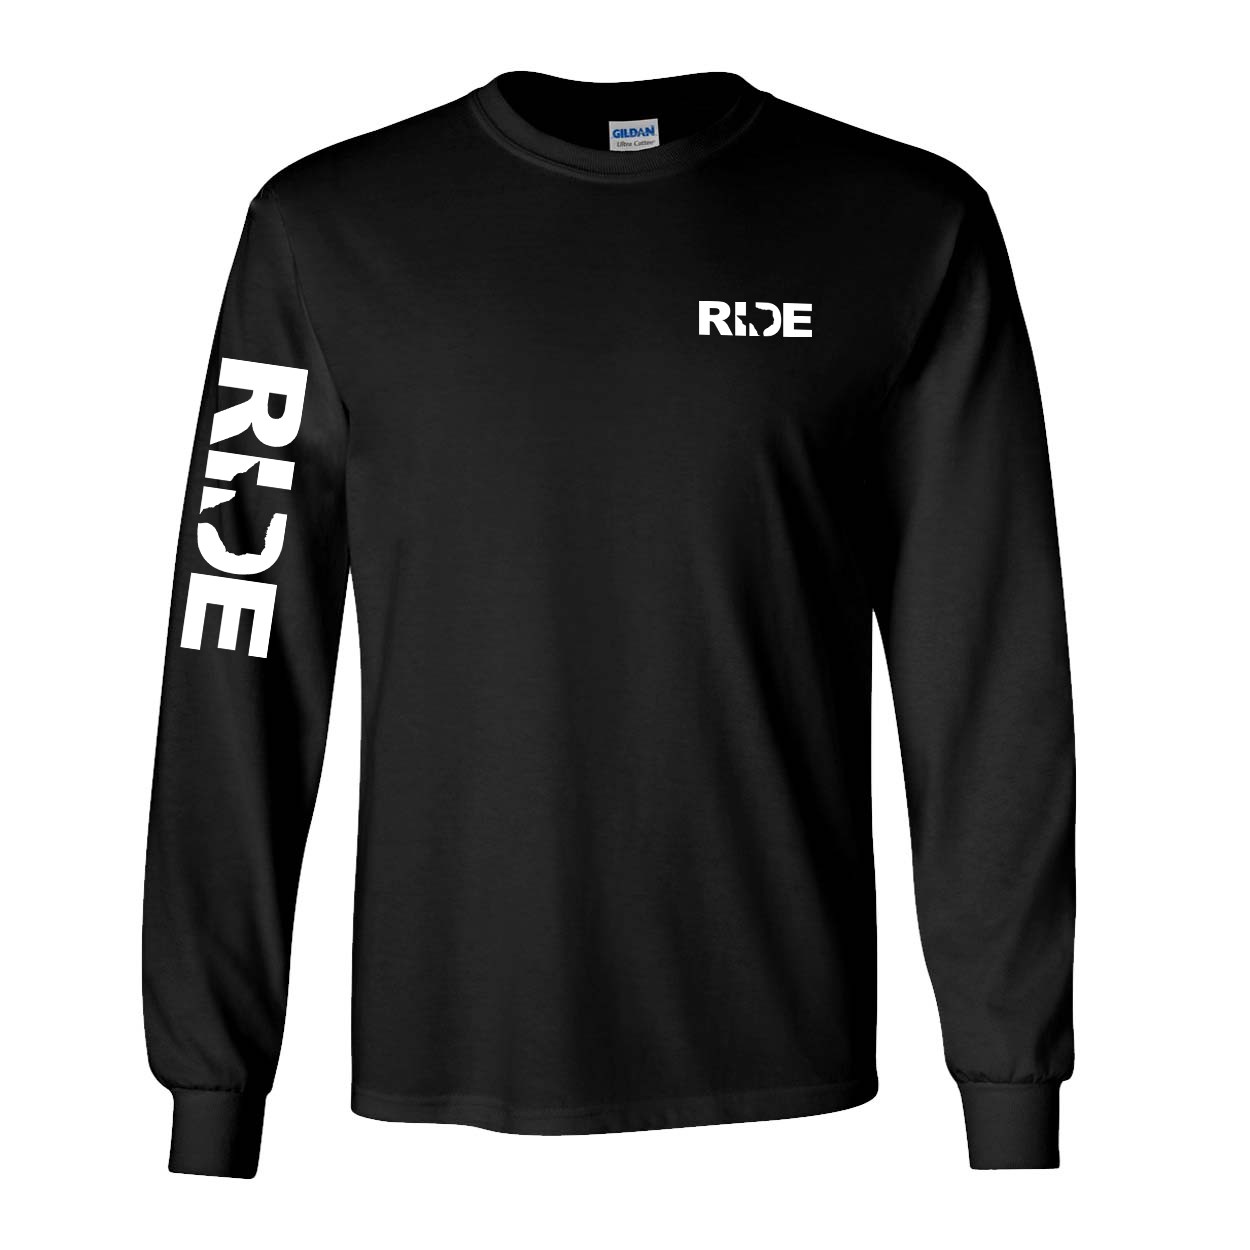 Ride Texas Night Out Long Sleeve T-Shirt with Arm Logo Black (White Logo)